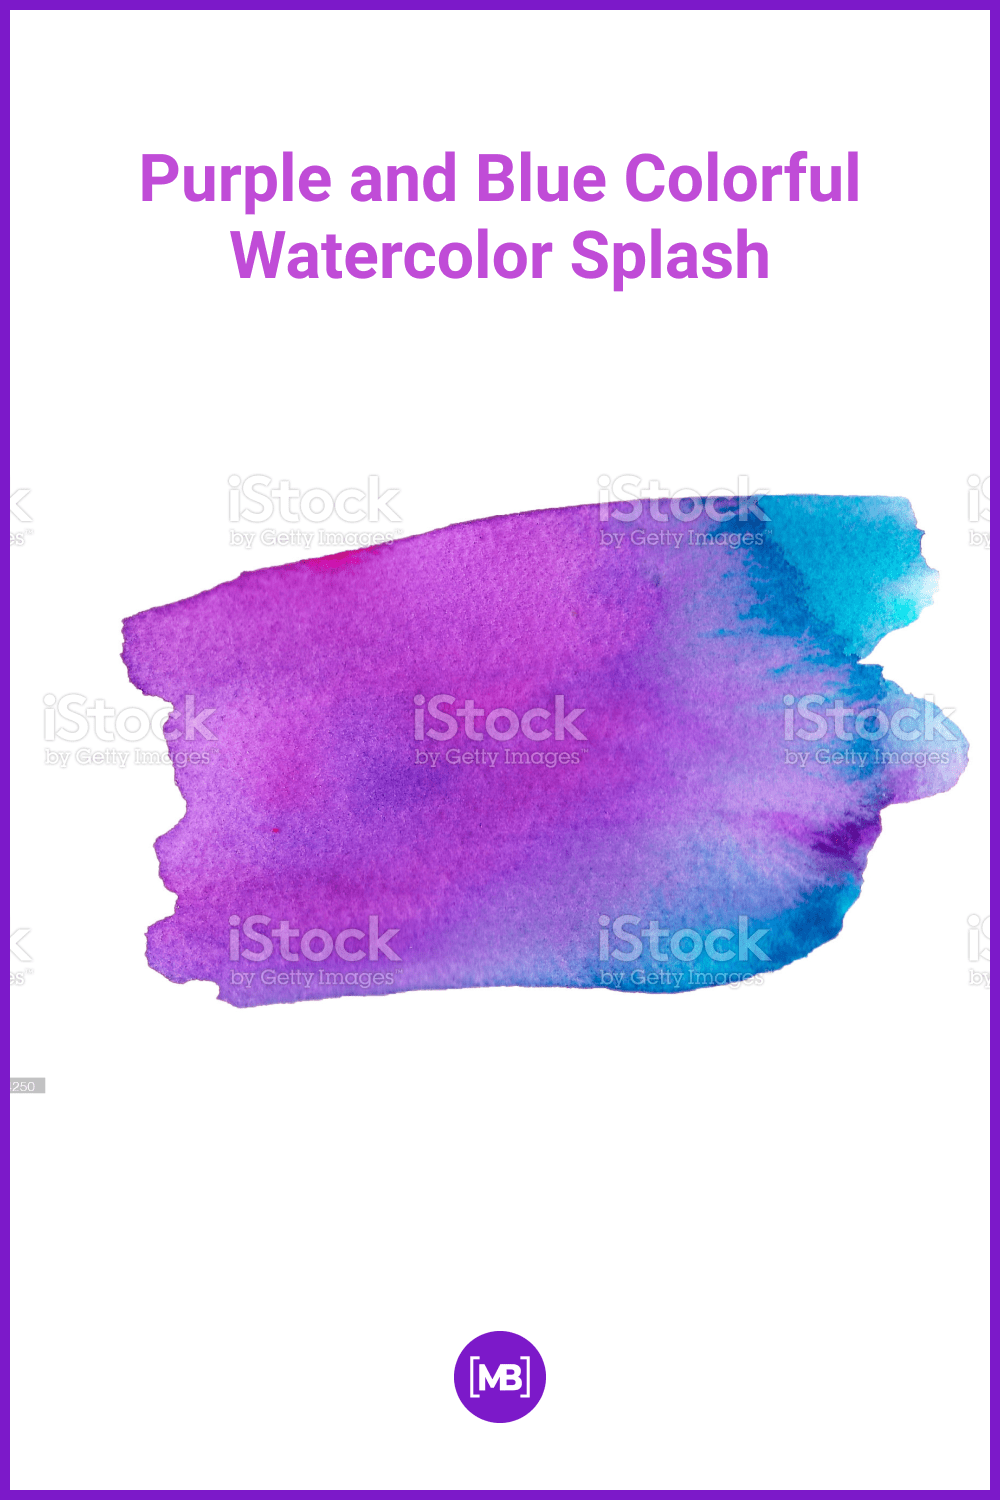 Purple and blue colorful watercolor blob on white background.